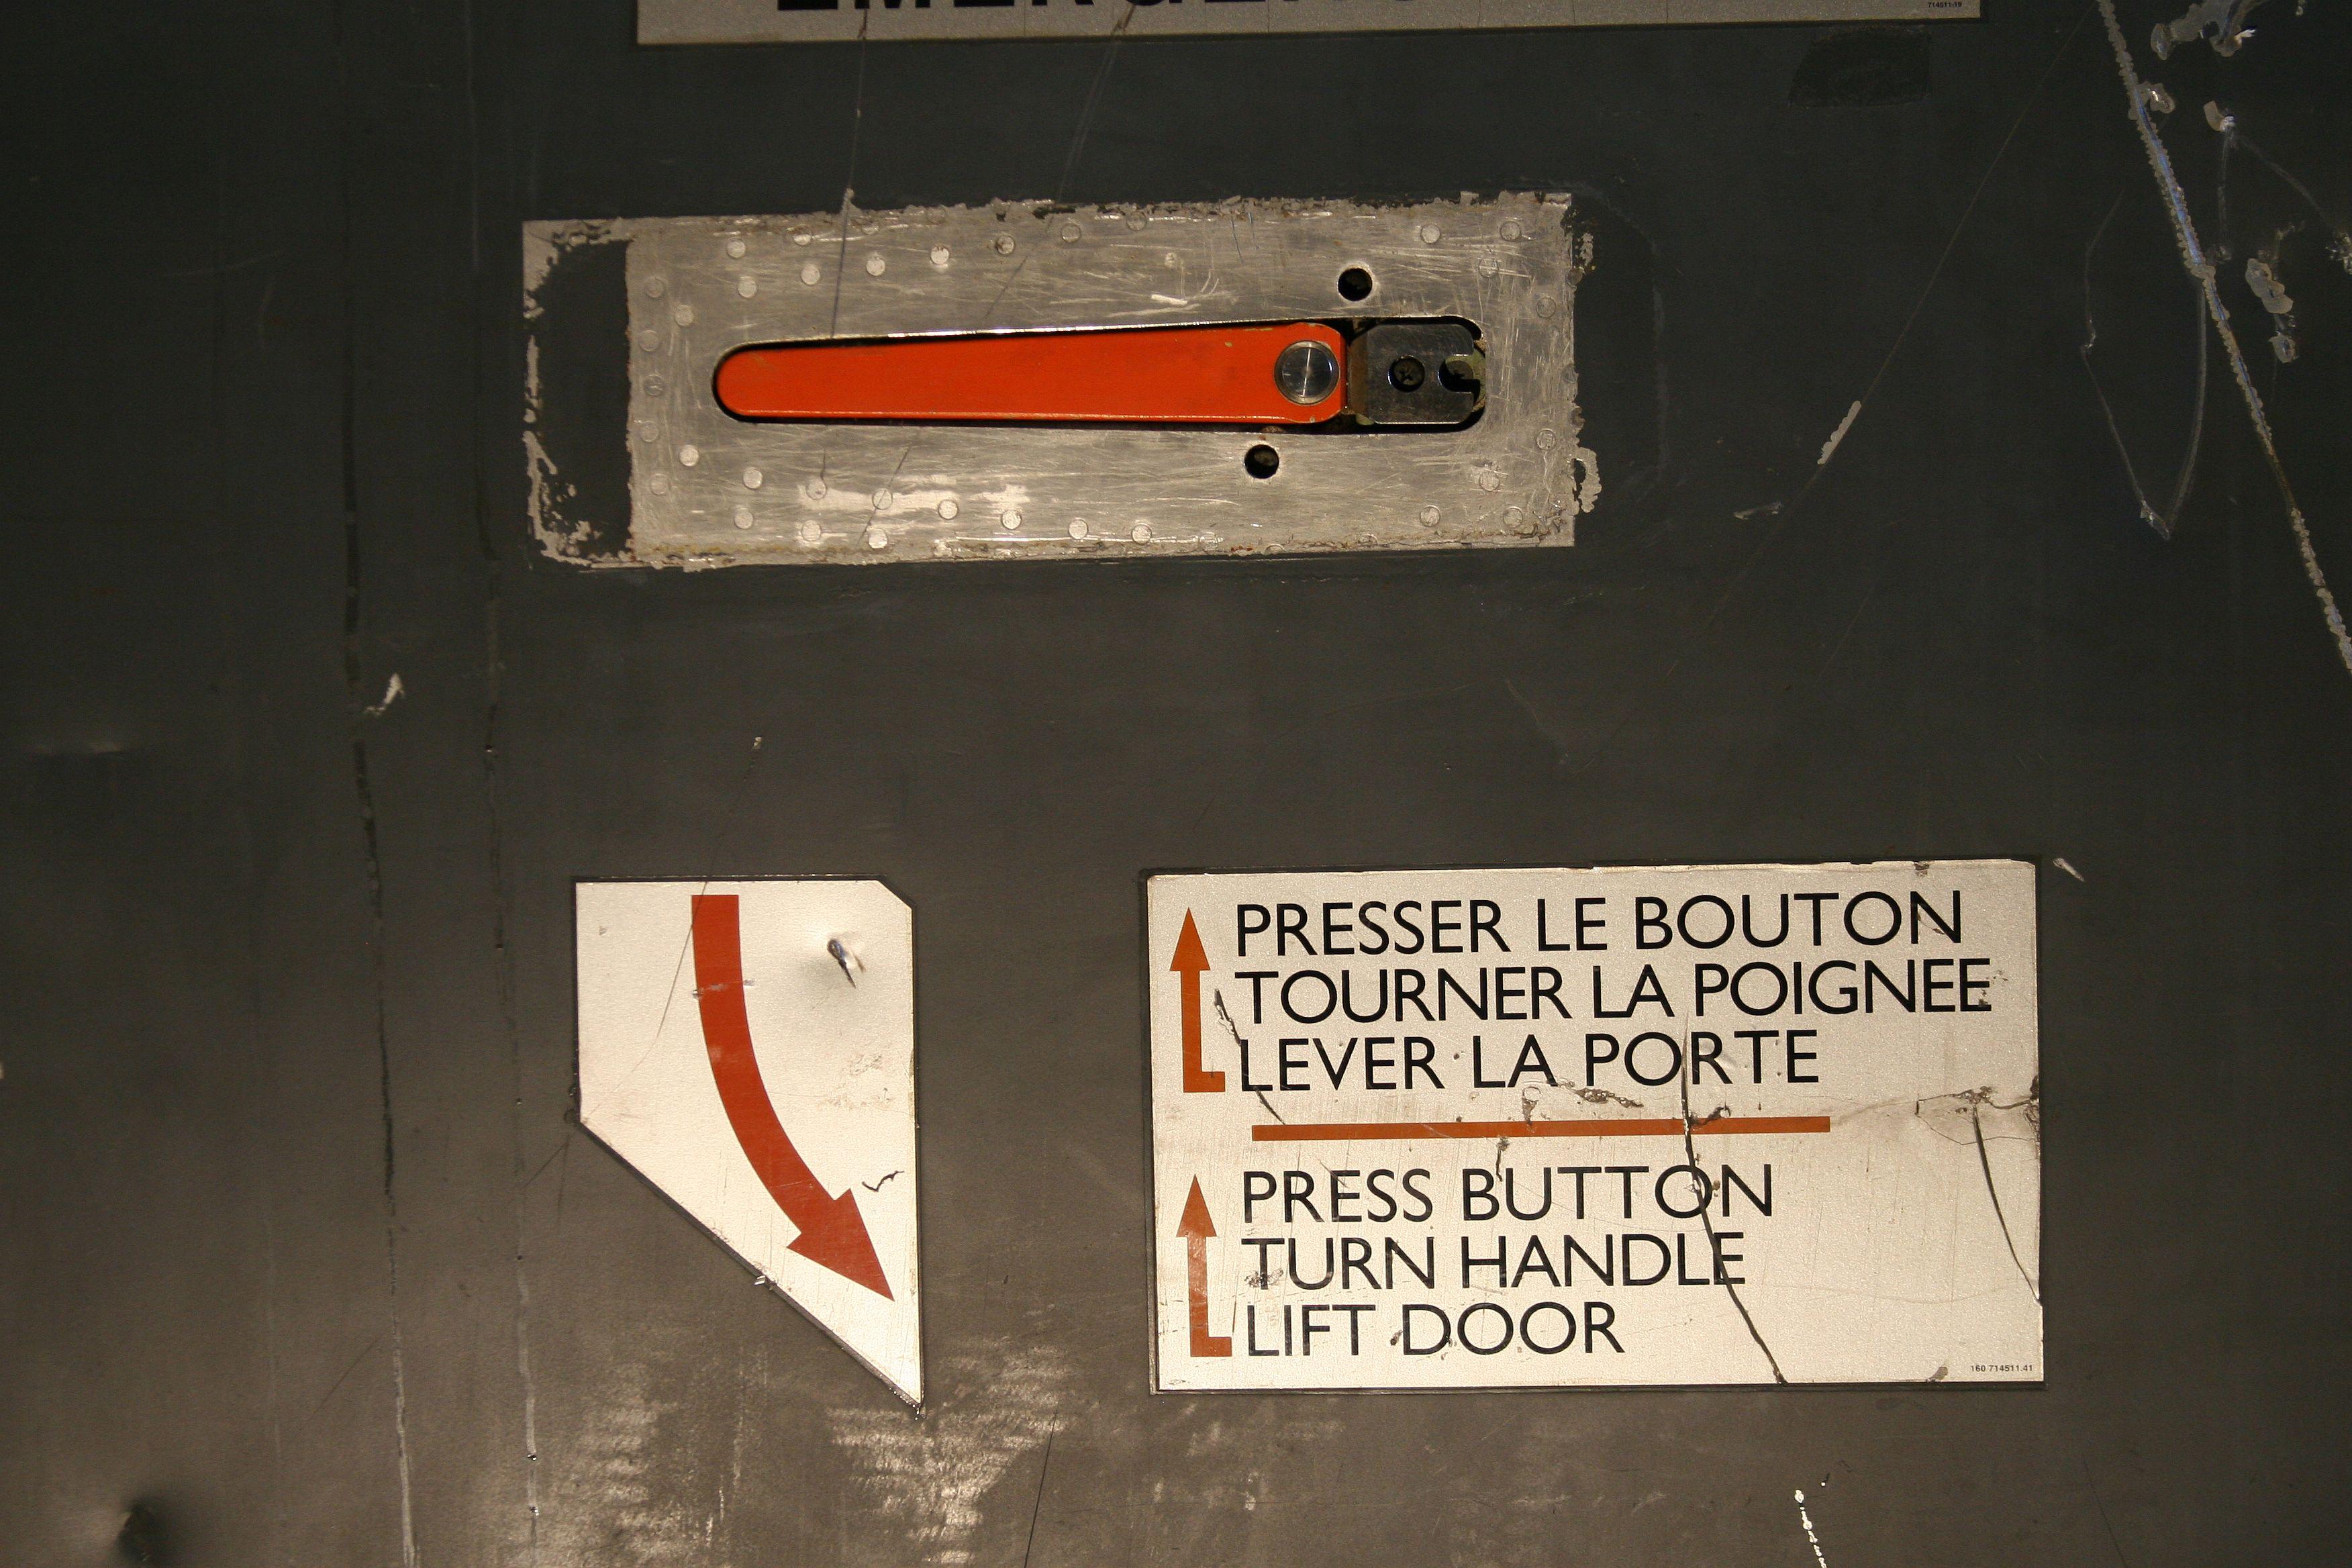 Aluminum 1970s Emergency Door from the C-160 Aircraft For Sale